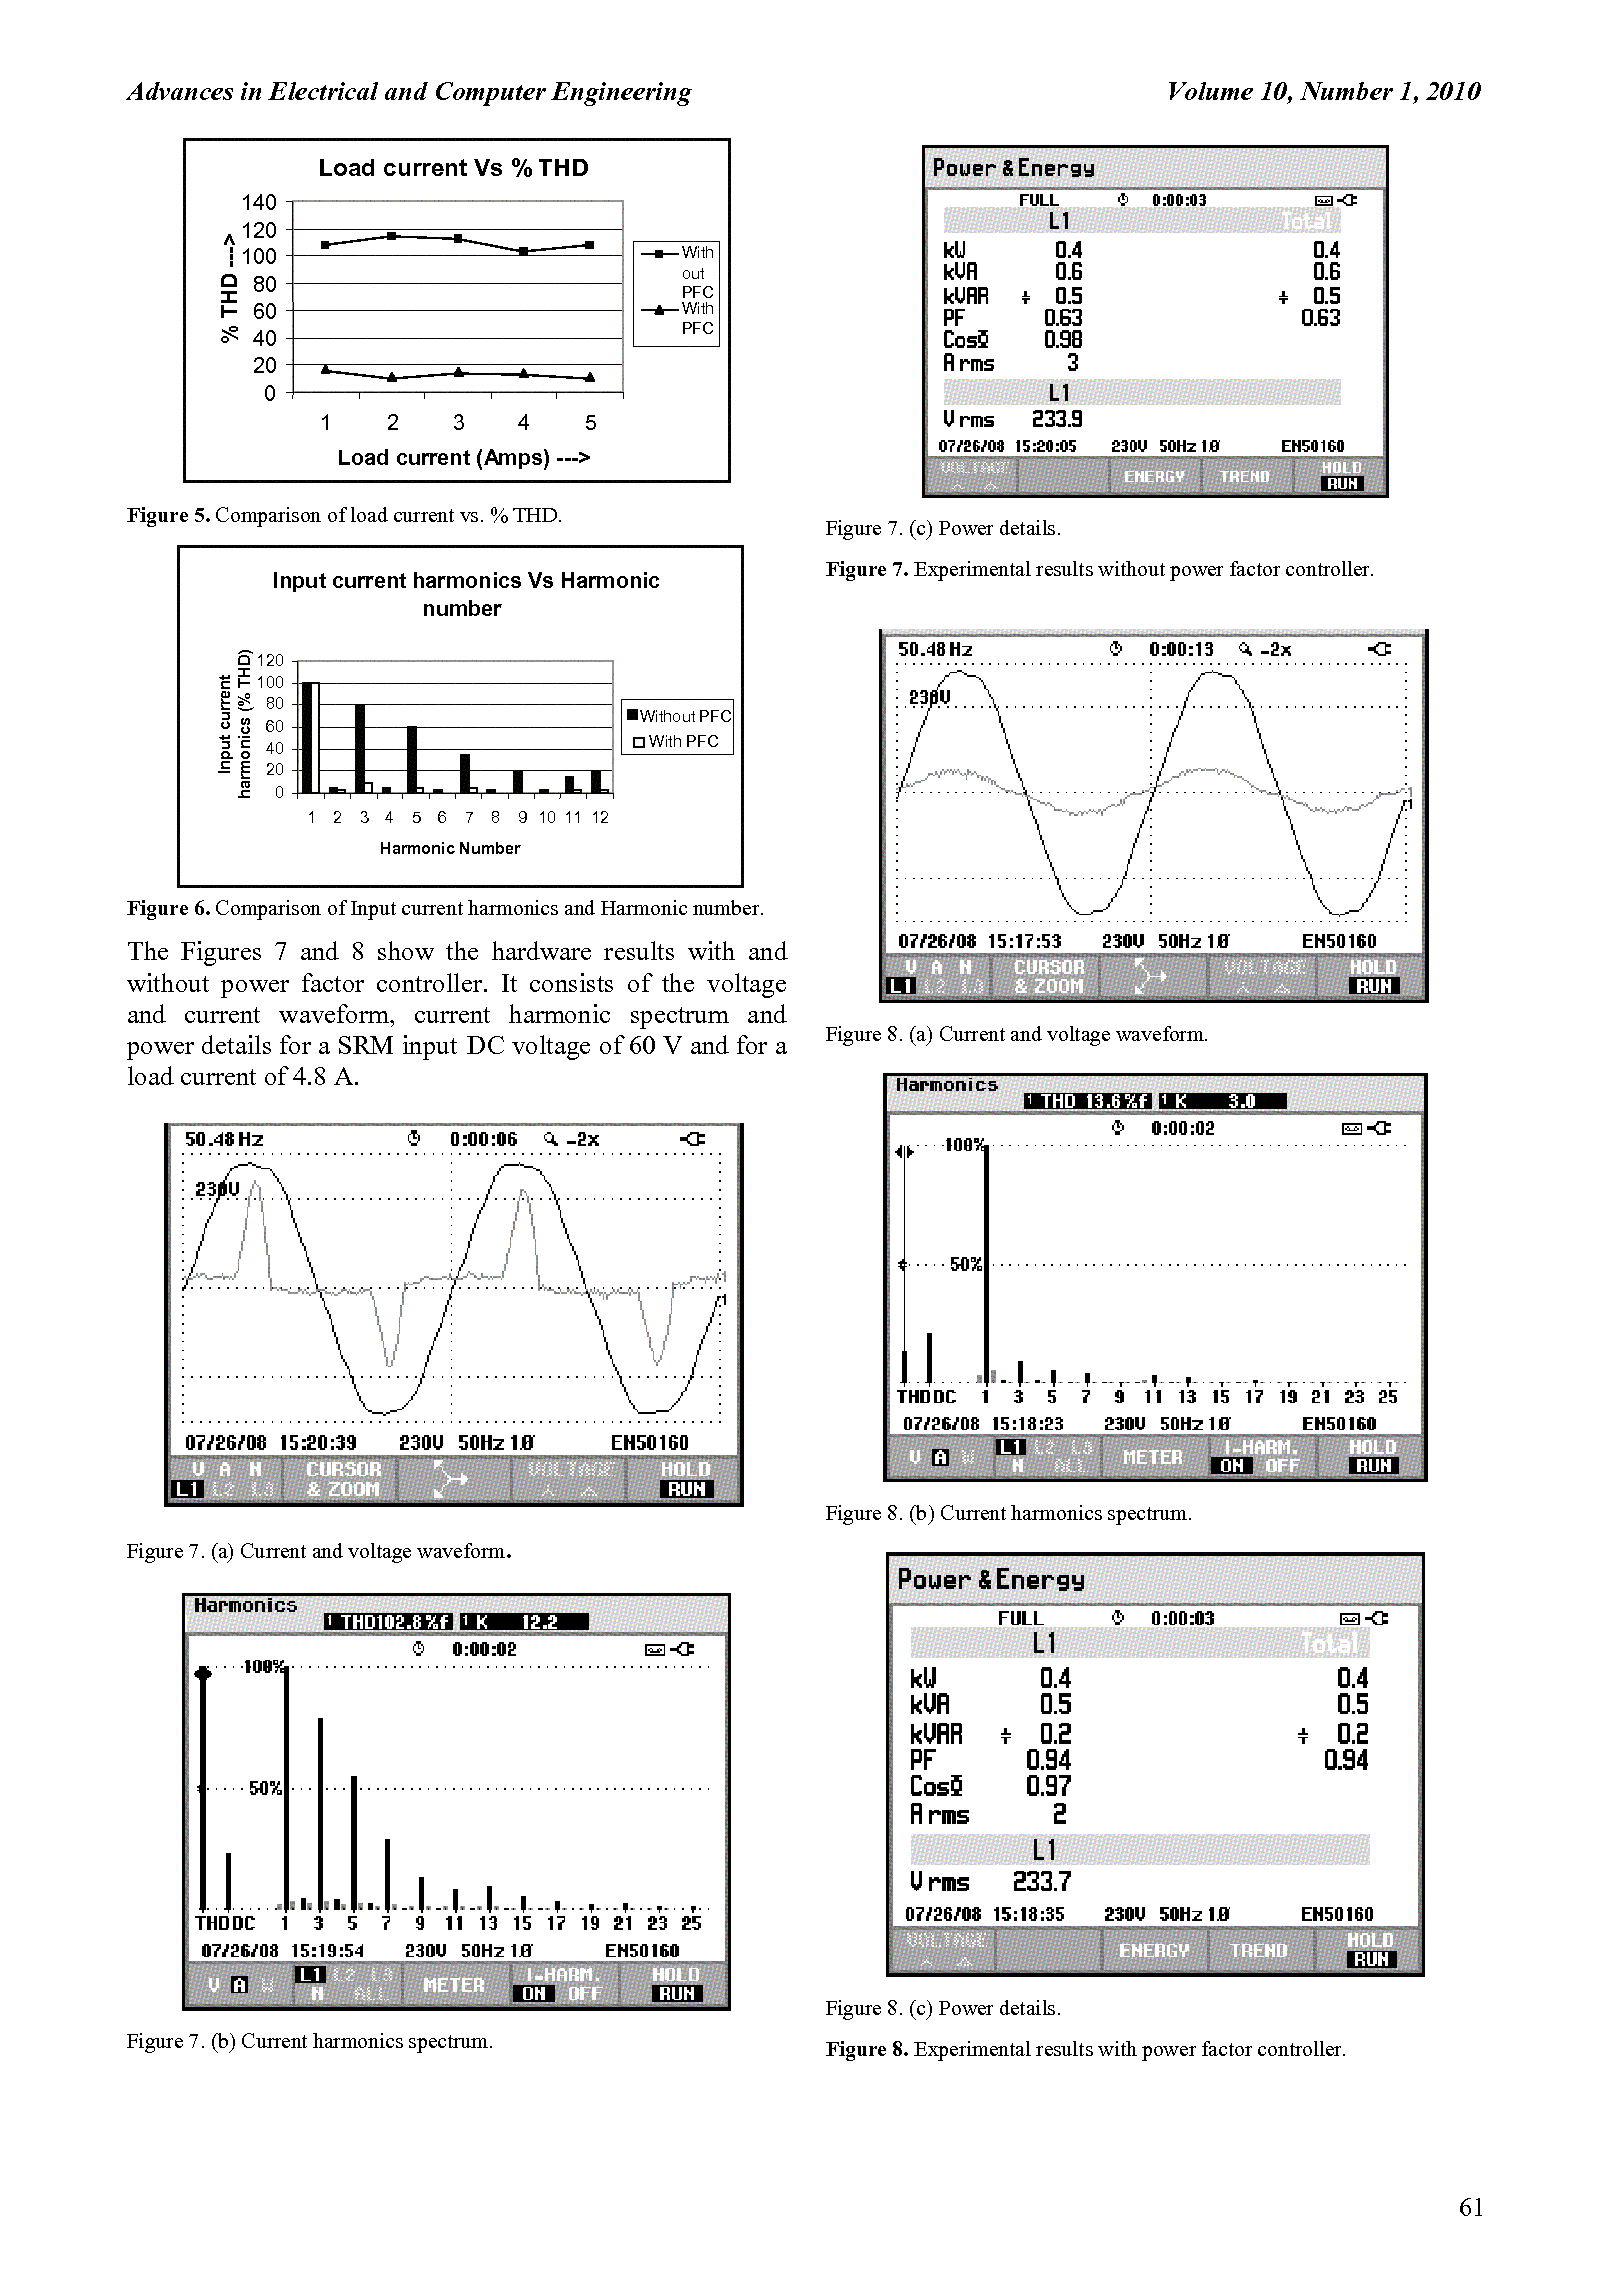 PDF Quickview for paper with DOI:10.4316/AECE.2010.01010